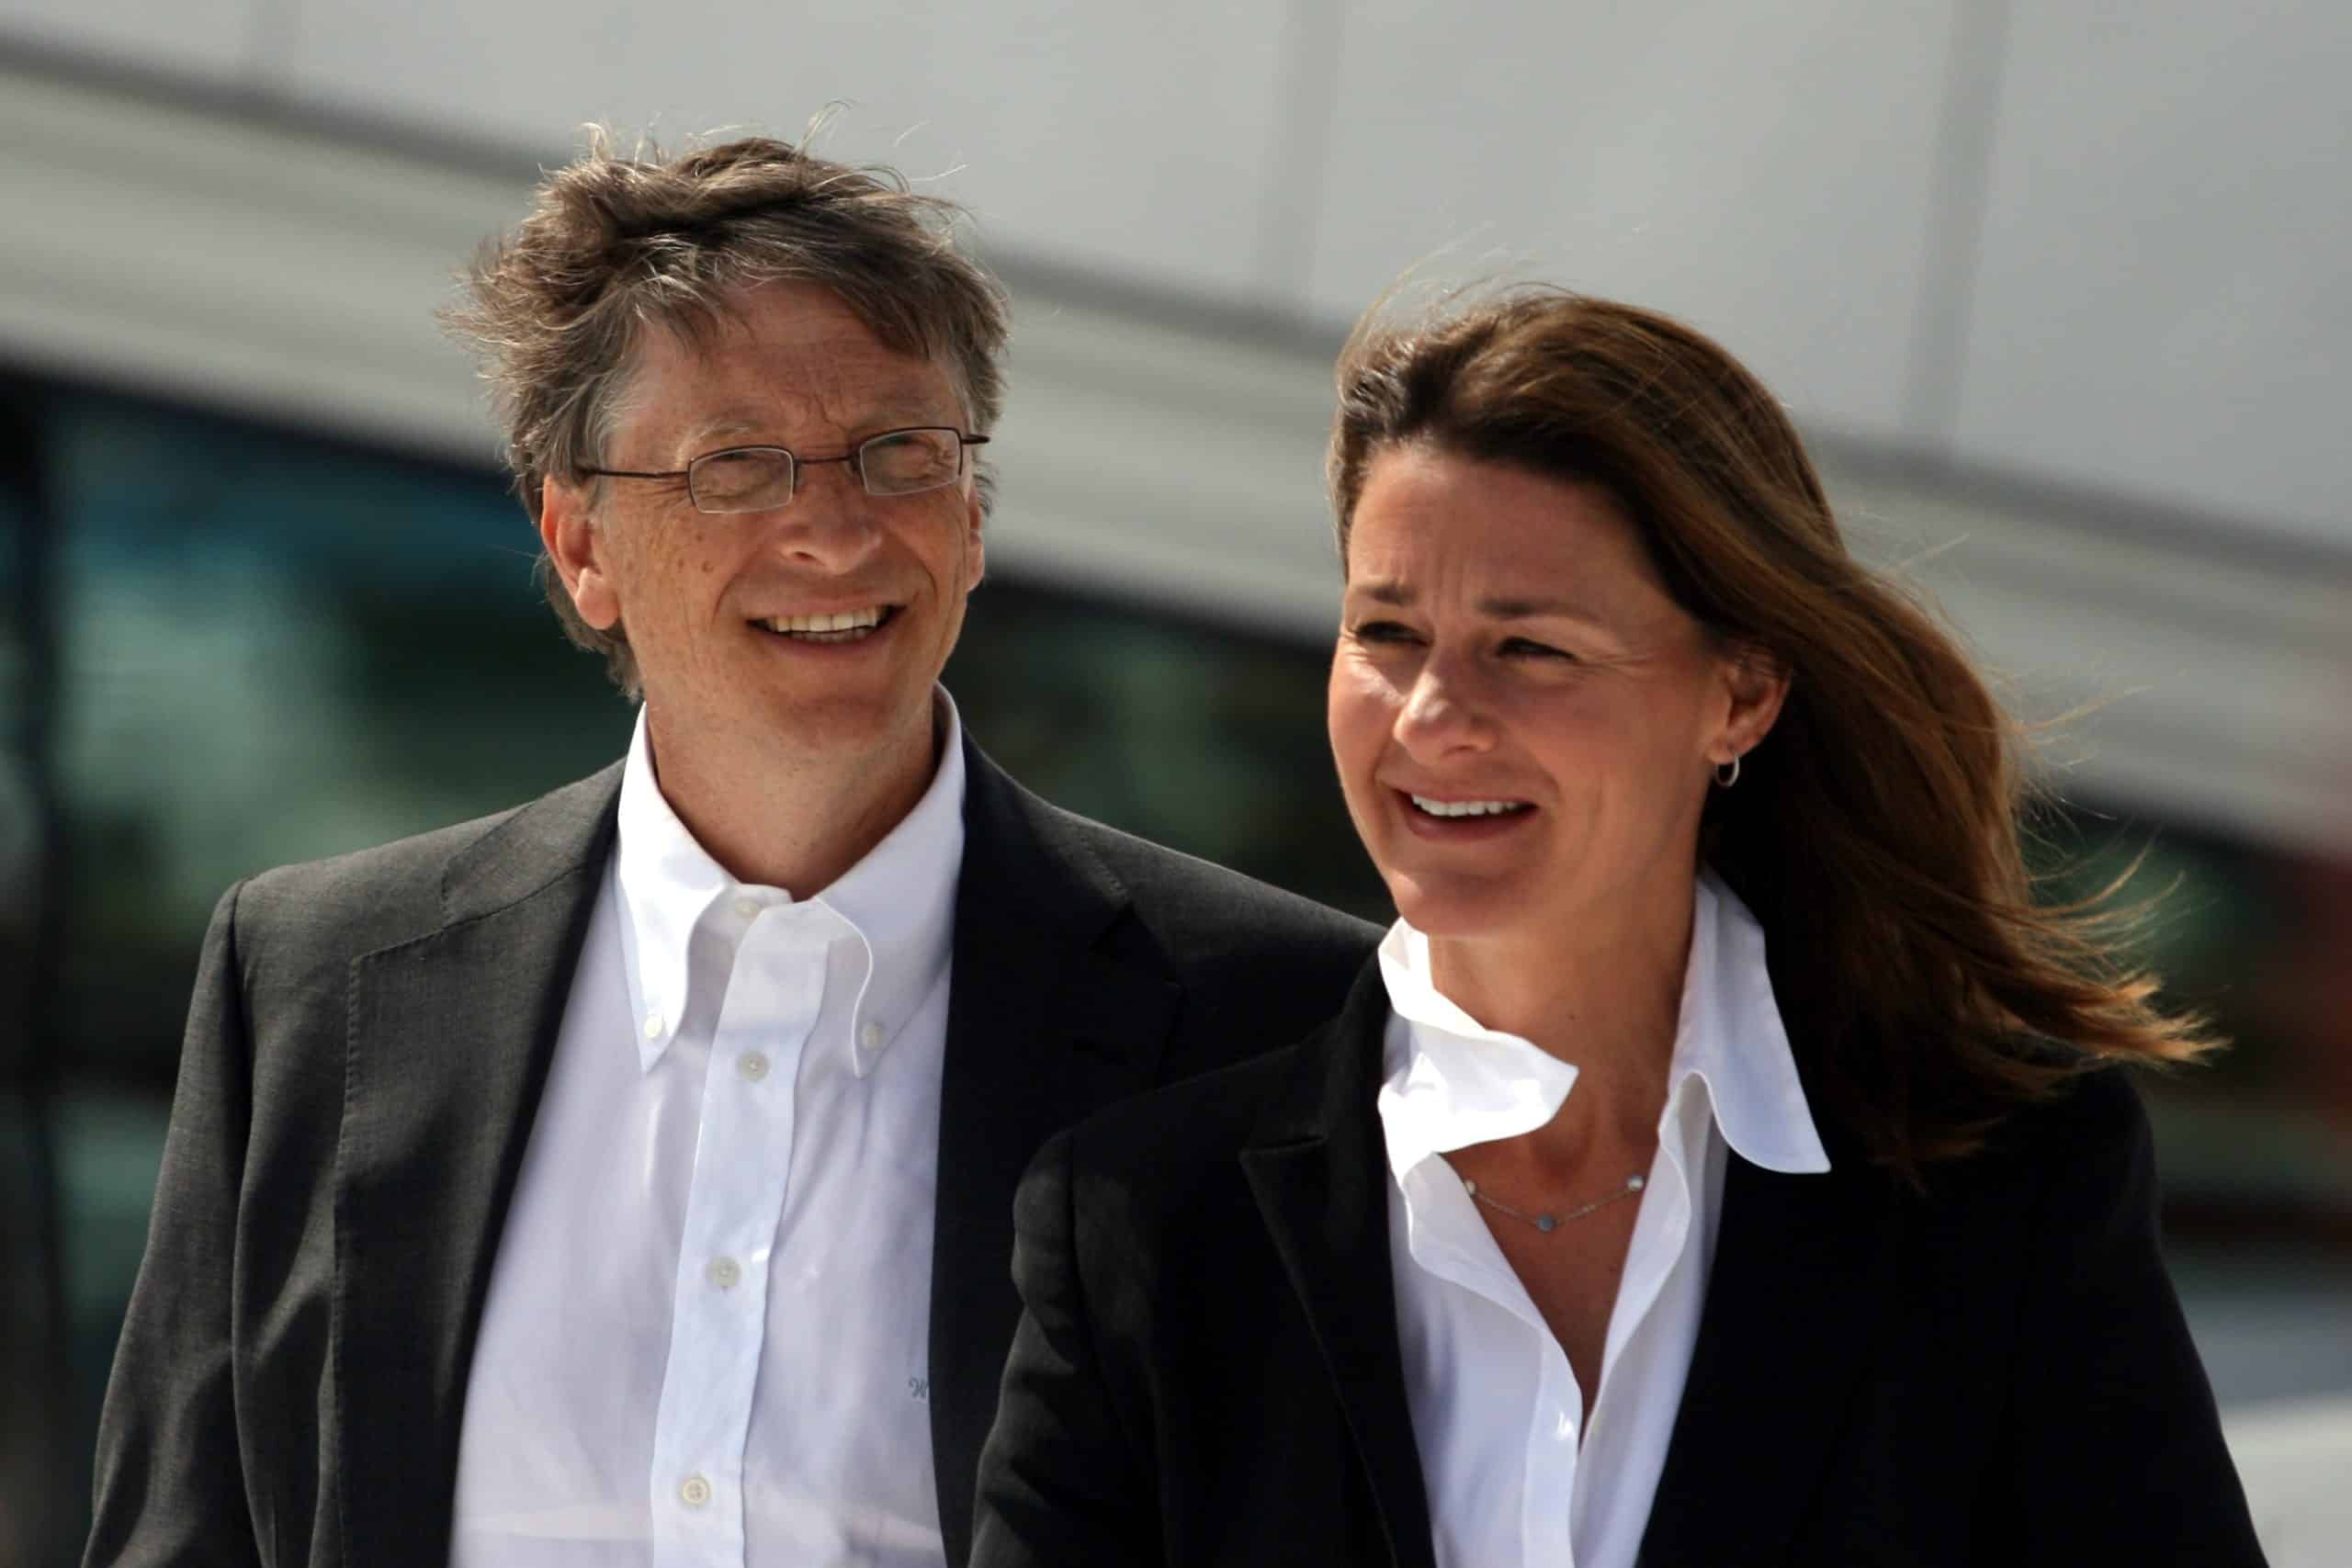 Biography of Bill Gates - Bill and Melinda Gates in 2009